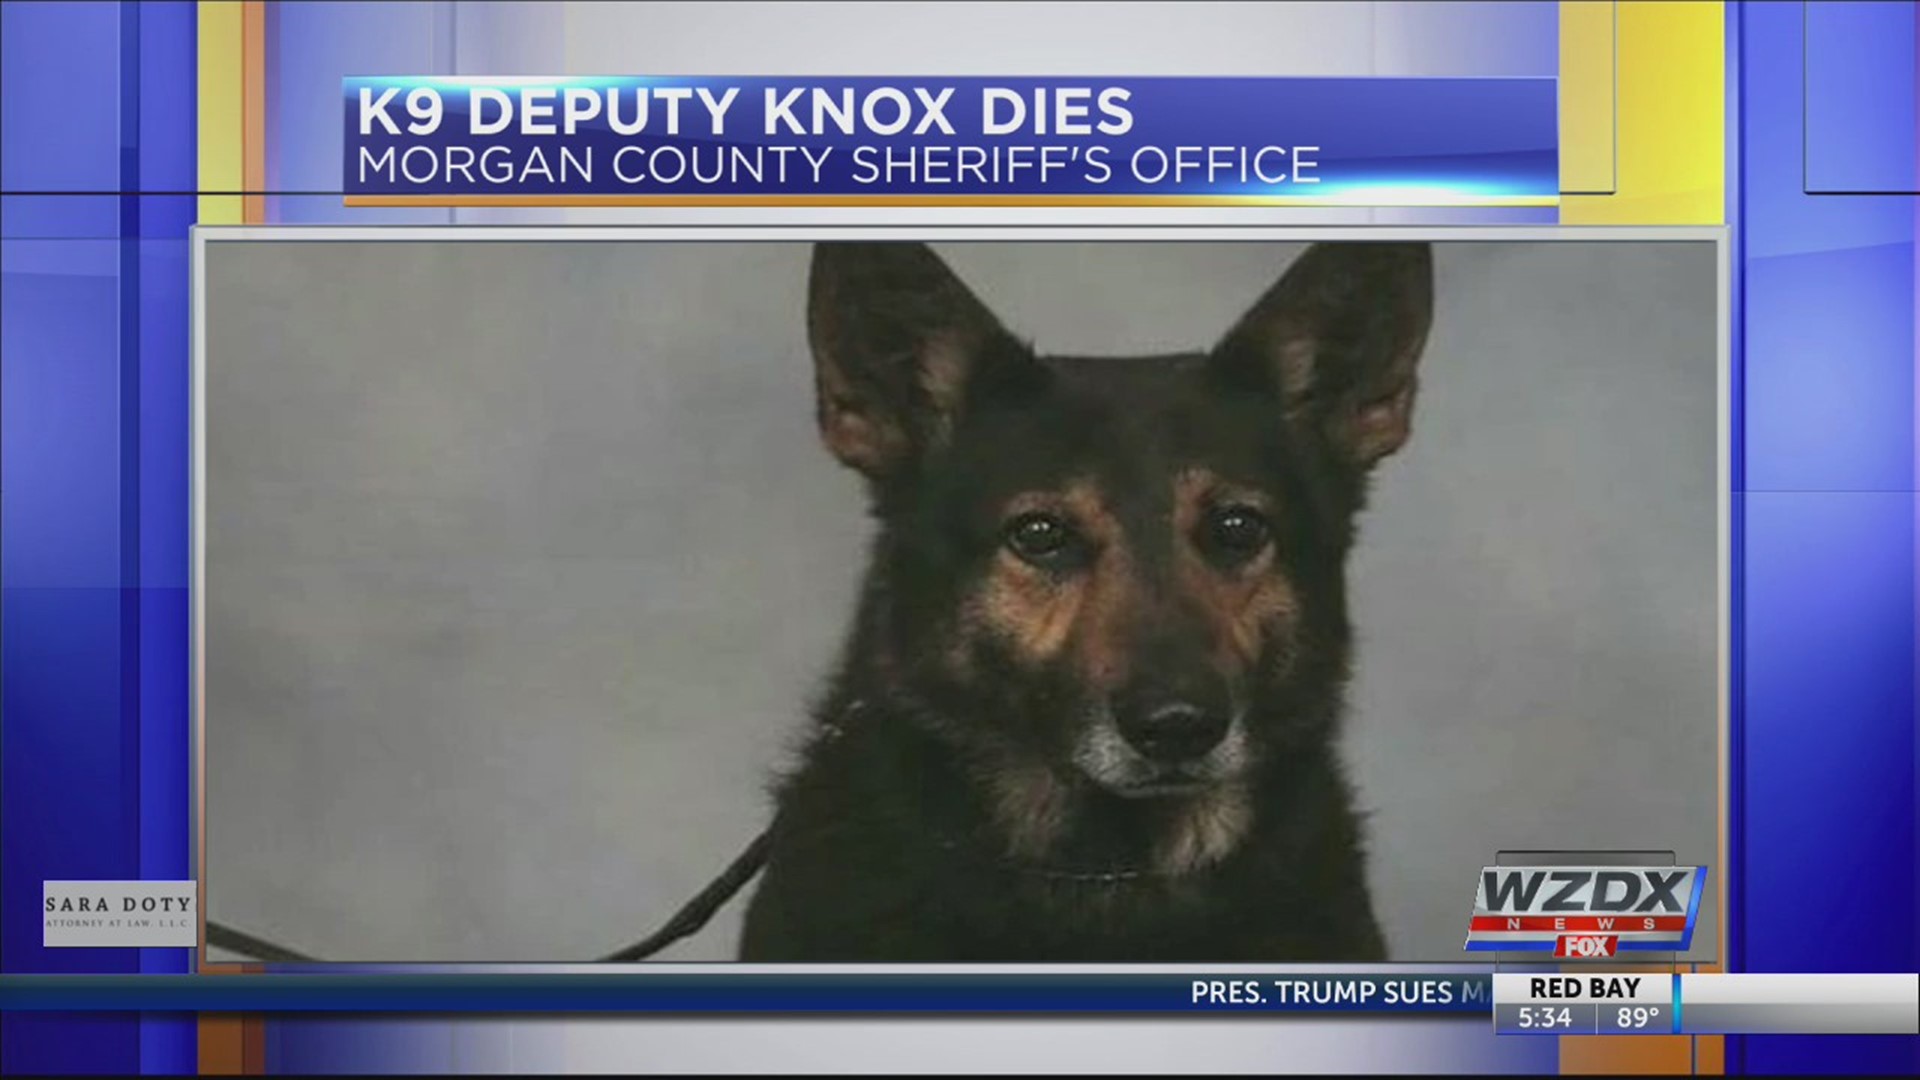 The Morgan County Sheriff's Office announced Thursday that one of their K9 officers passed away.